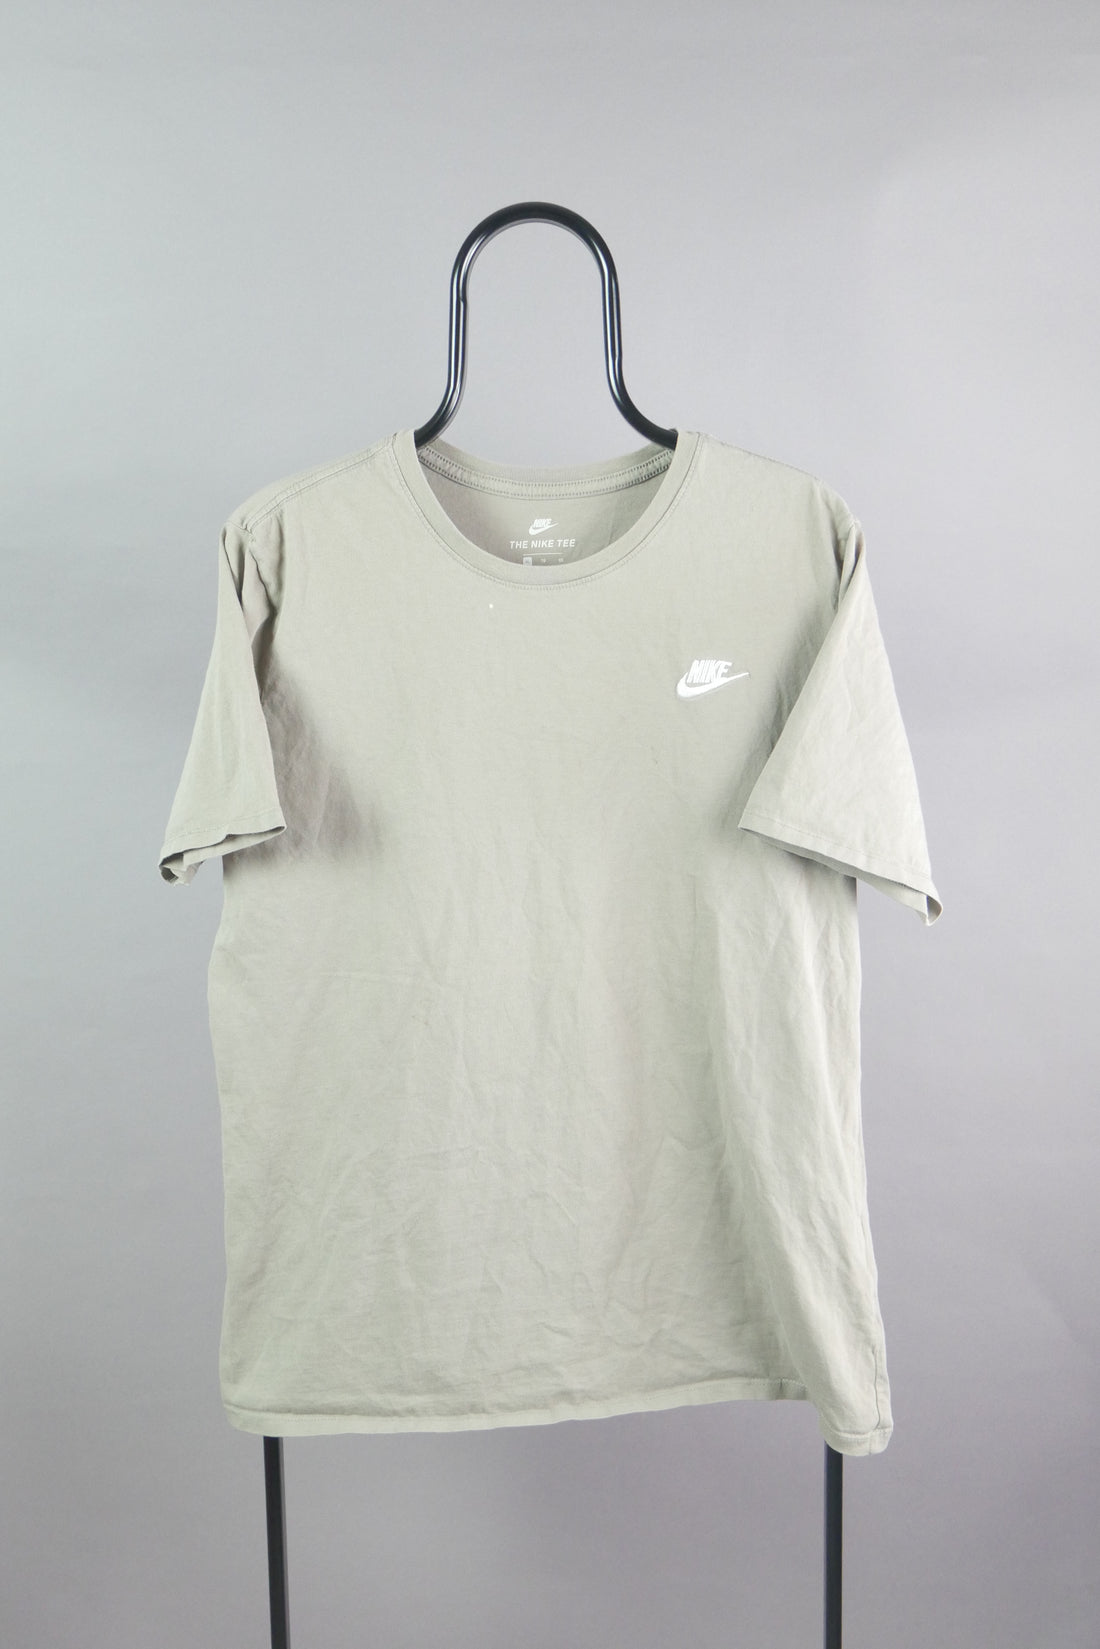 The Nike Embroidered Logo T-Shirt in Khaki (XL)